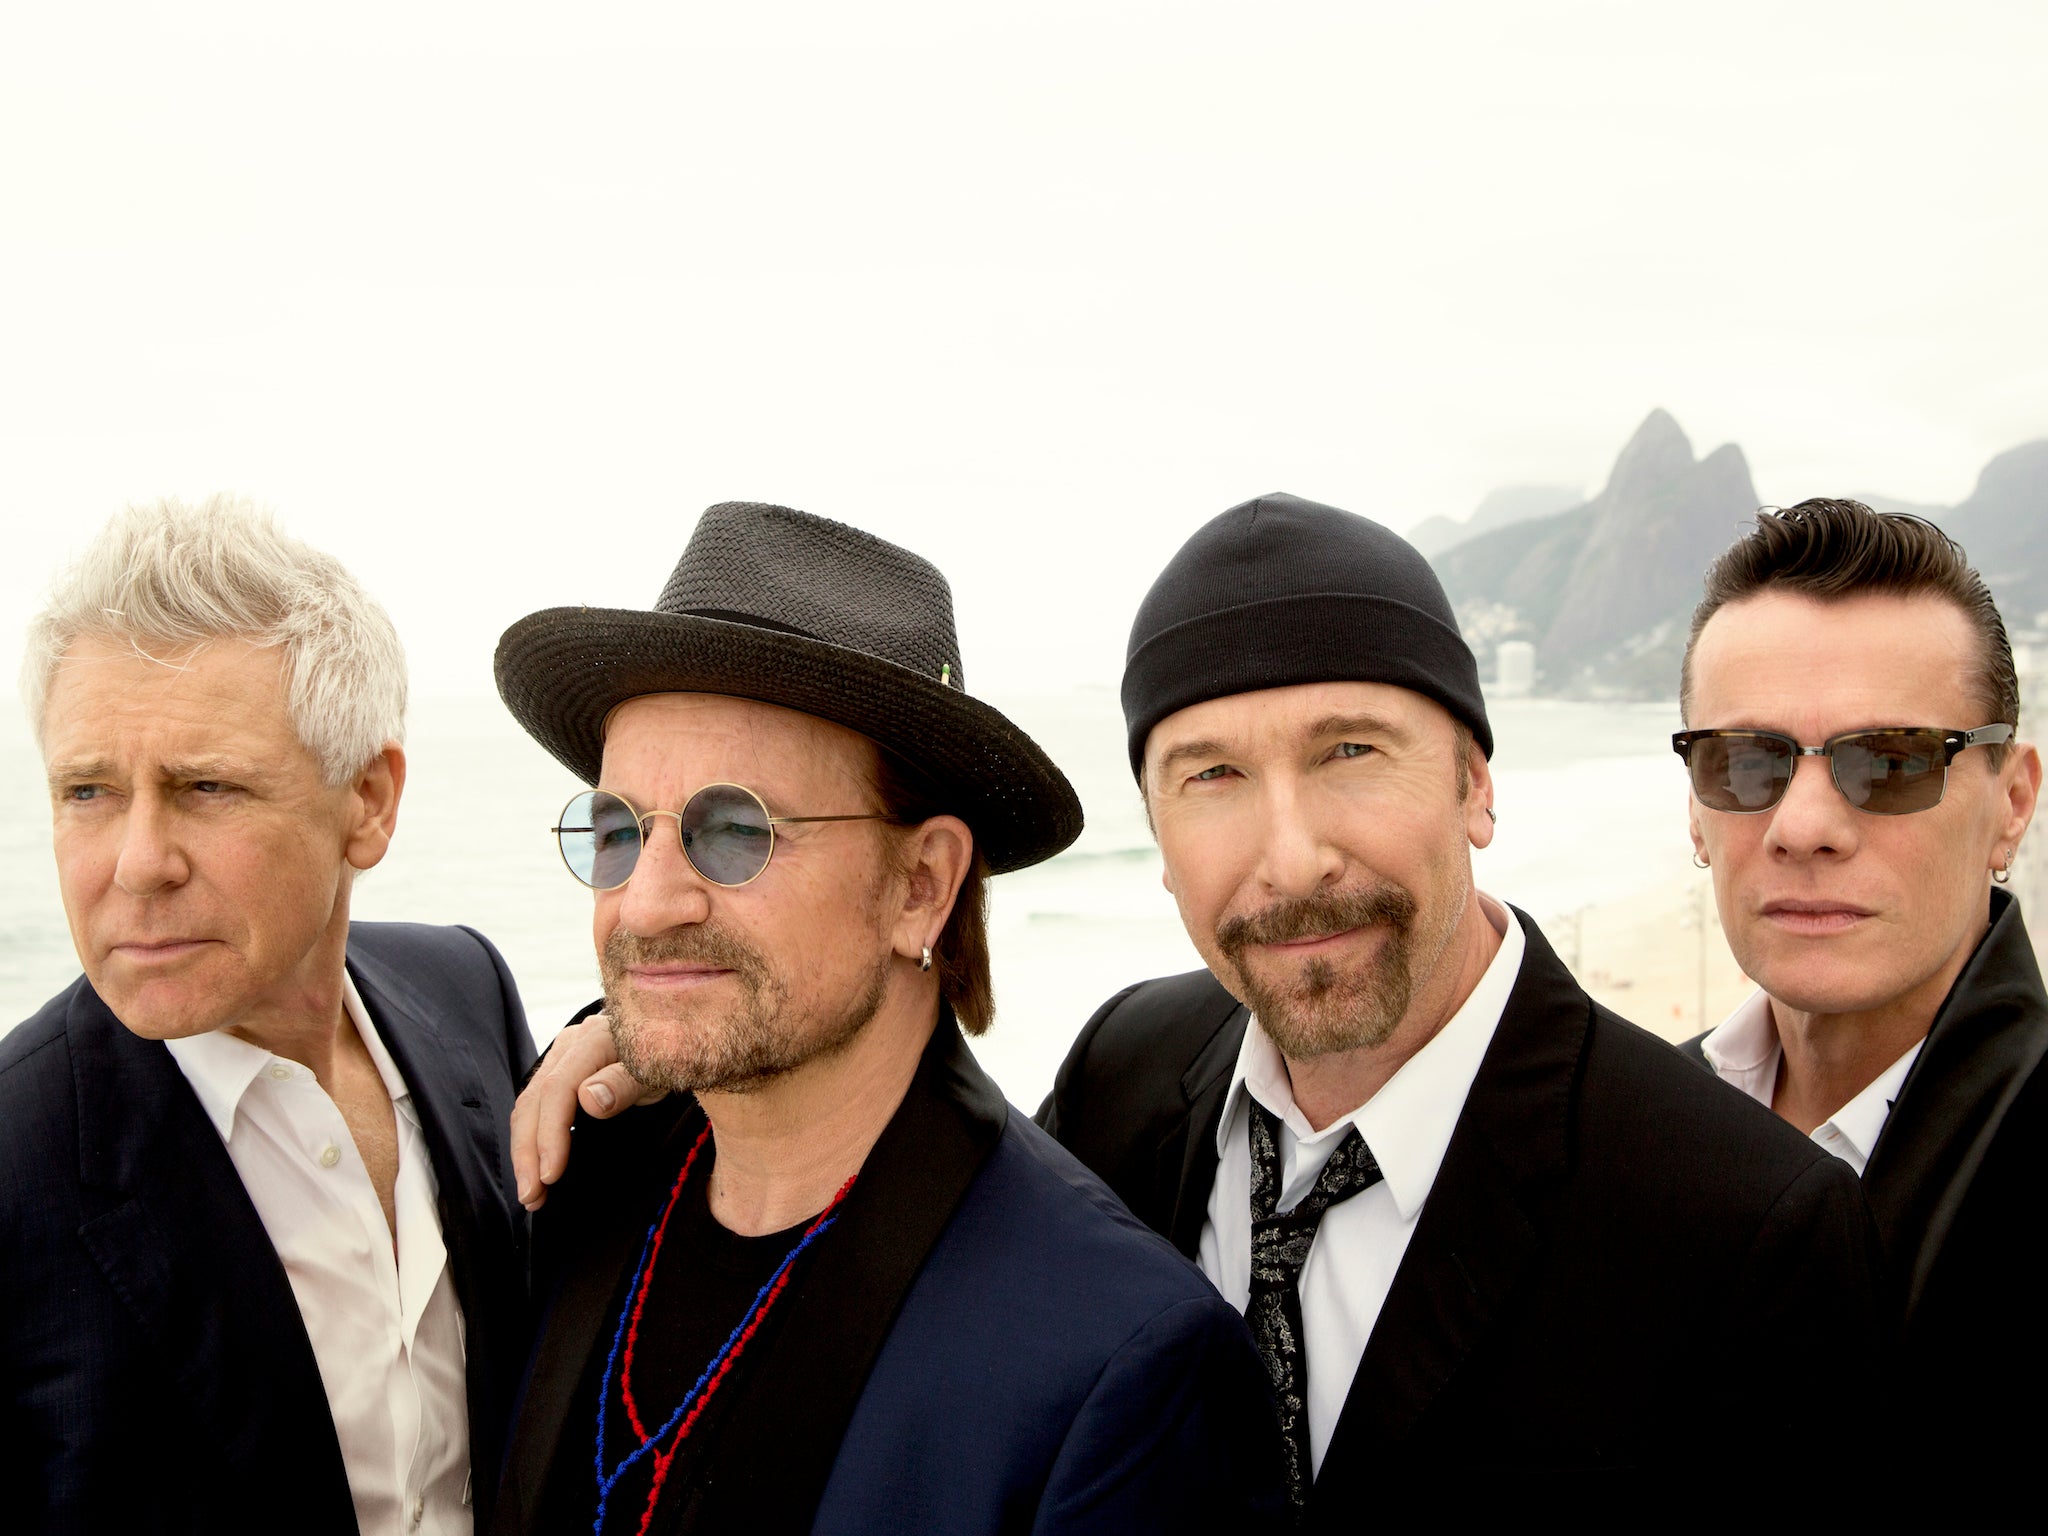 U2 Songs of Surrender review – all the anthems, but smaller, U2